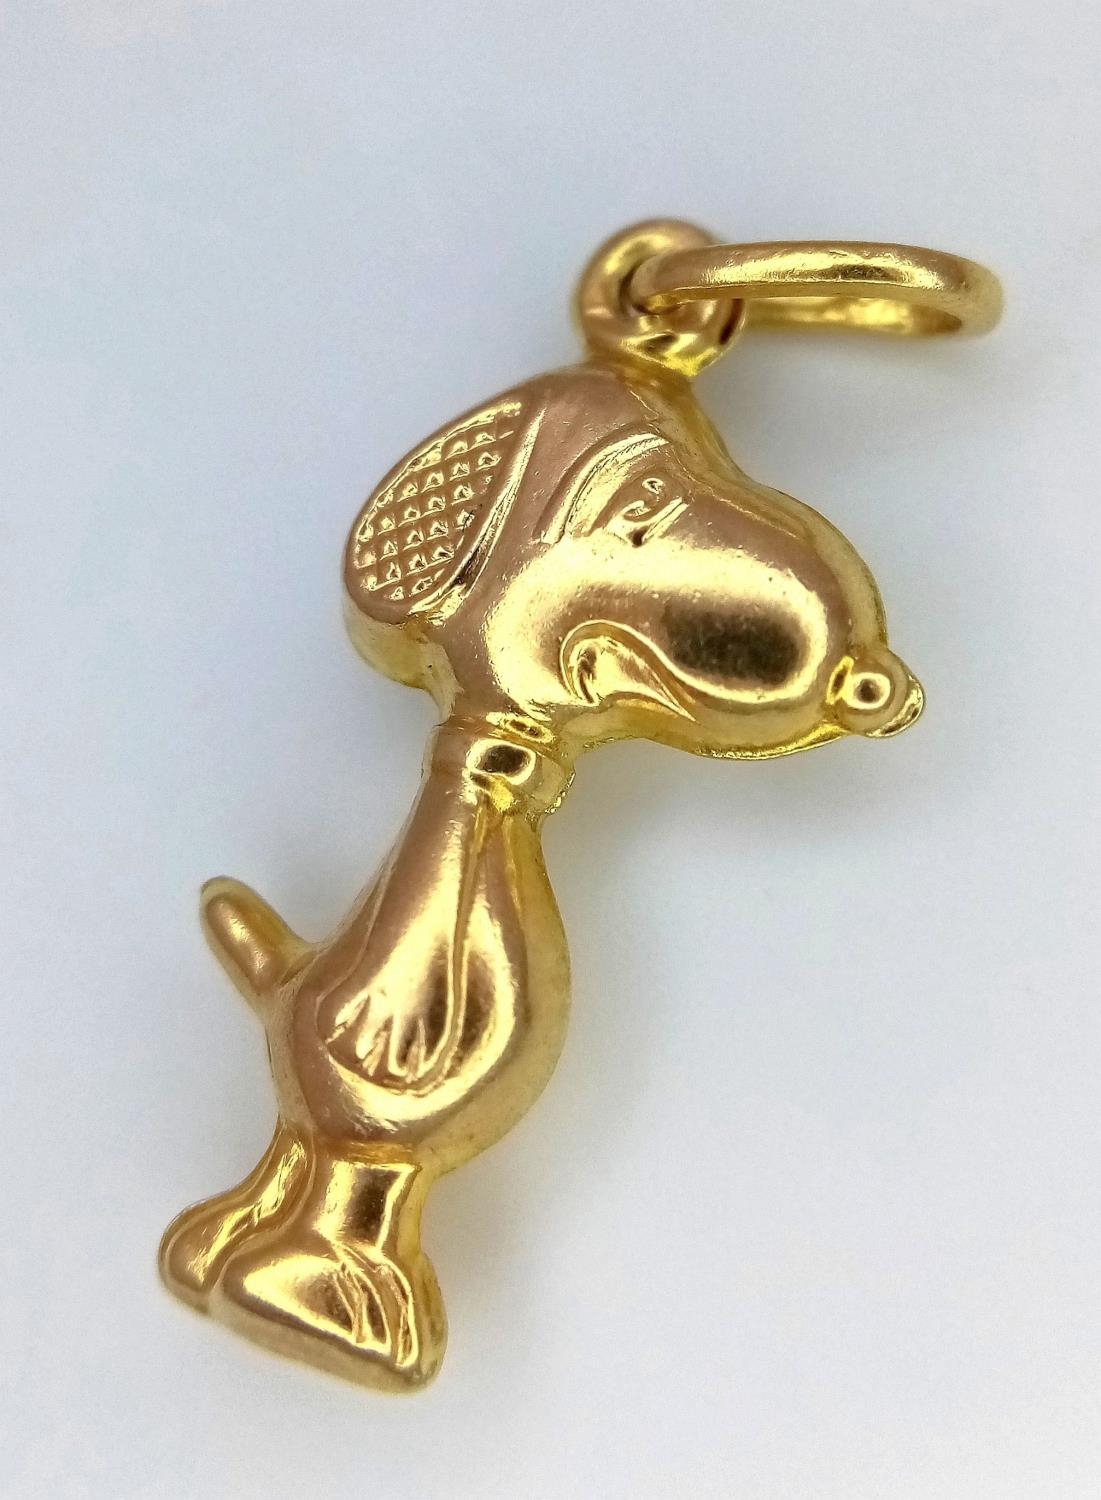 A 9K YELLOW GOLD SNOOPY THE DOG CHARM 1G , 37mm x 10mm. SC 9006 - Image 2 of 4